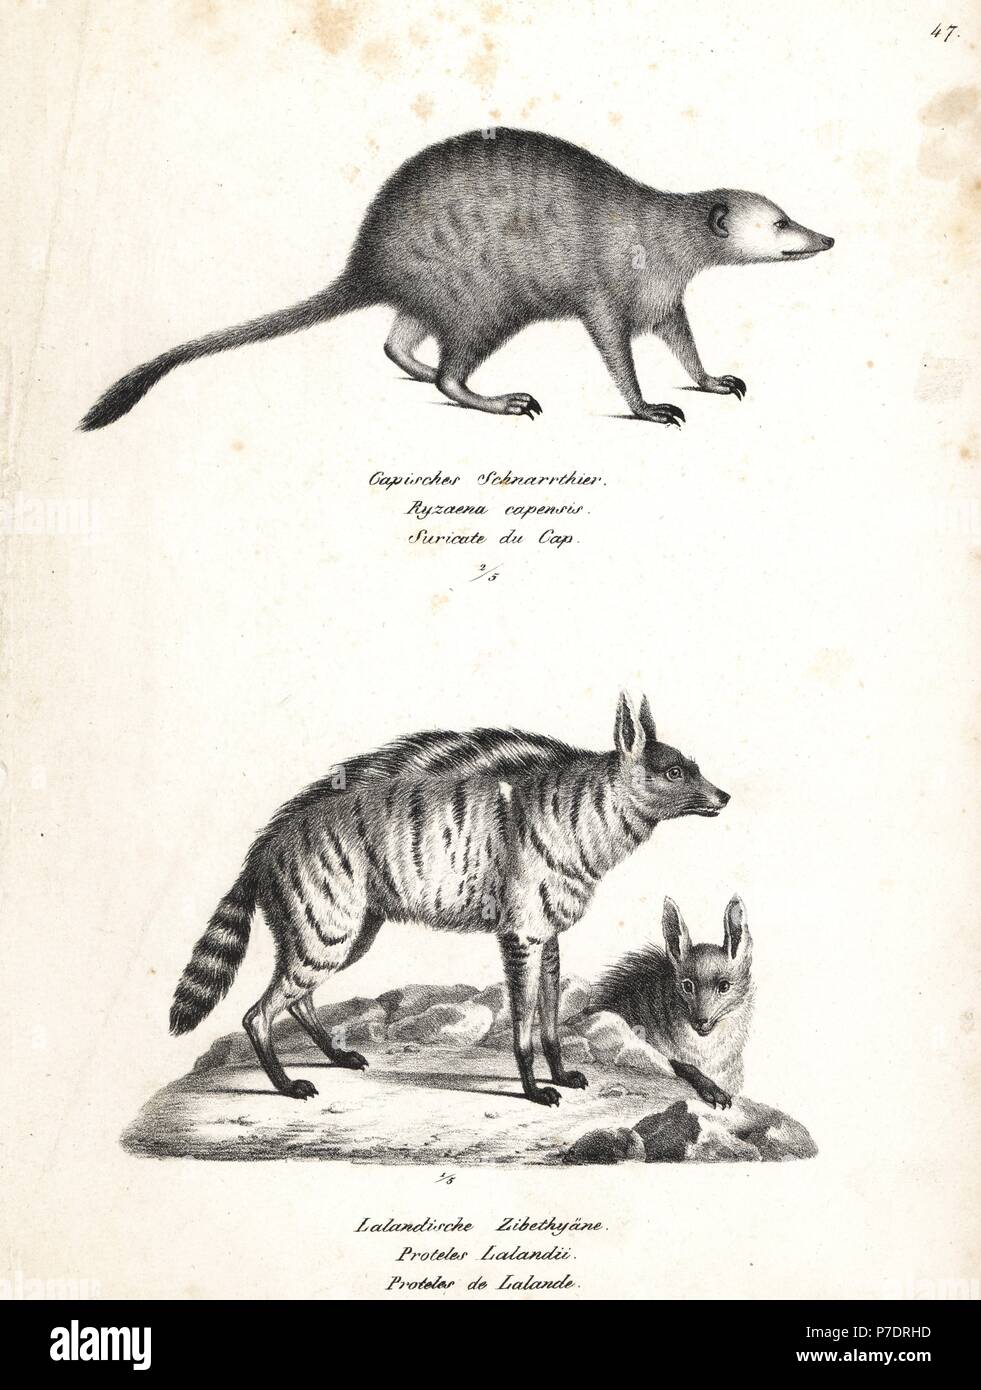 Meerkat or suricate, Suricata suricatta, and aardwolf, Proteles cristata. Lithograph by Karl Joseph Brodtmann from Heinrich Rudolf Schinz's Illustrated Natural History of Men and Animals, 1836. Stock Photo